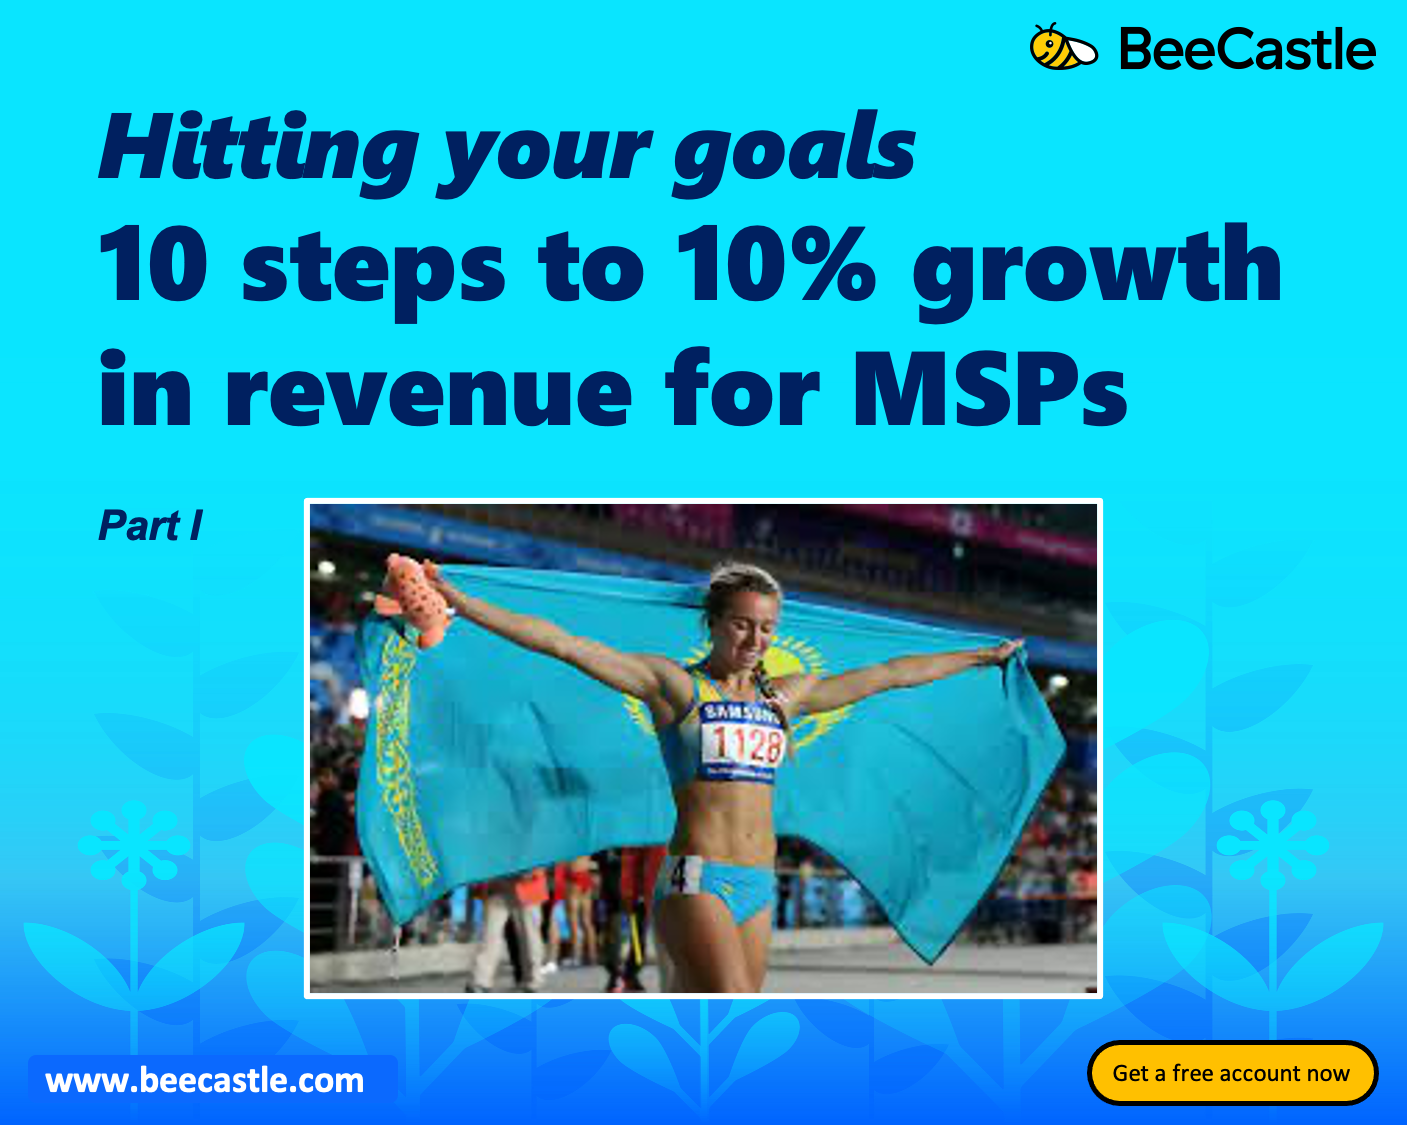 Thumbnail of 10 steps to 10% growth in revenue for MSPs - Part I 